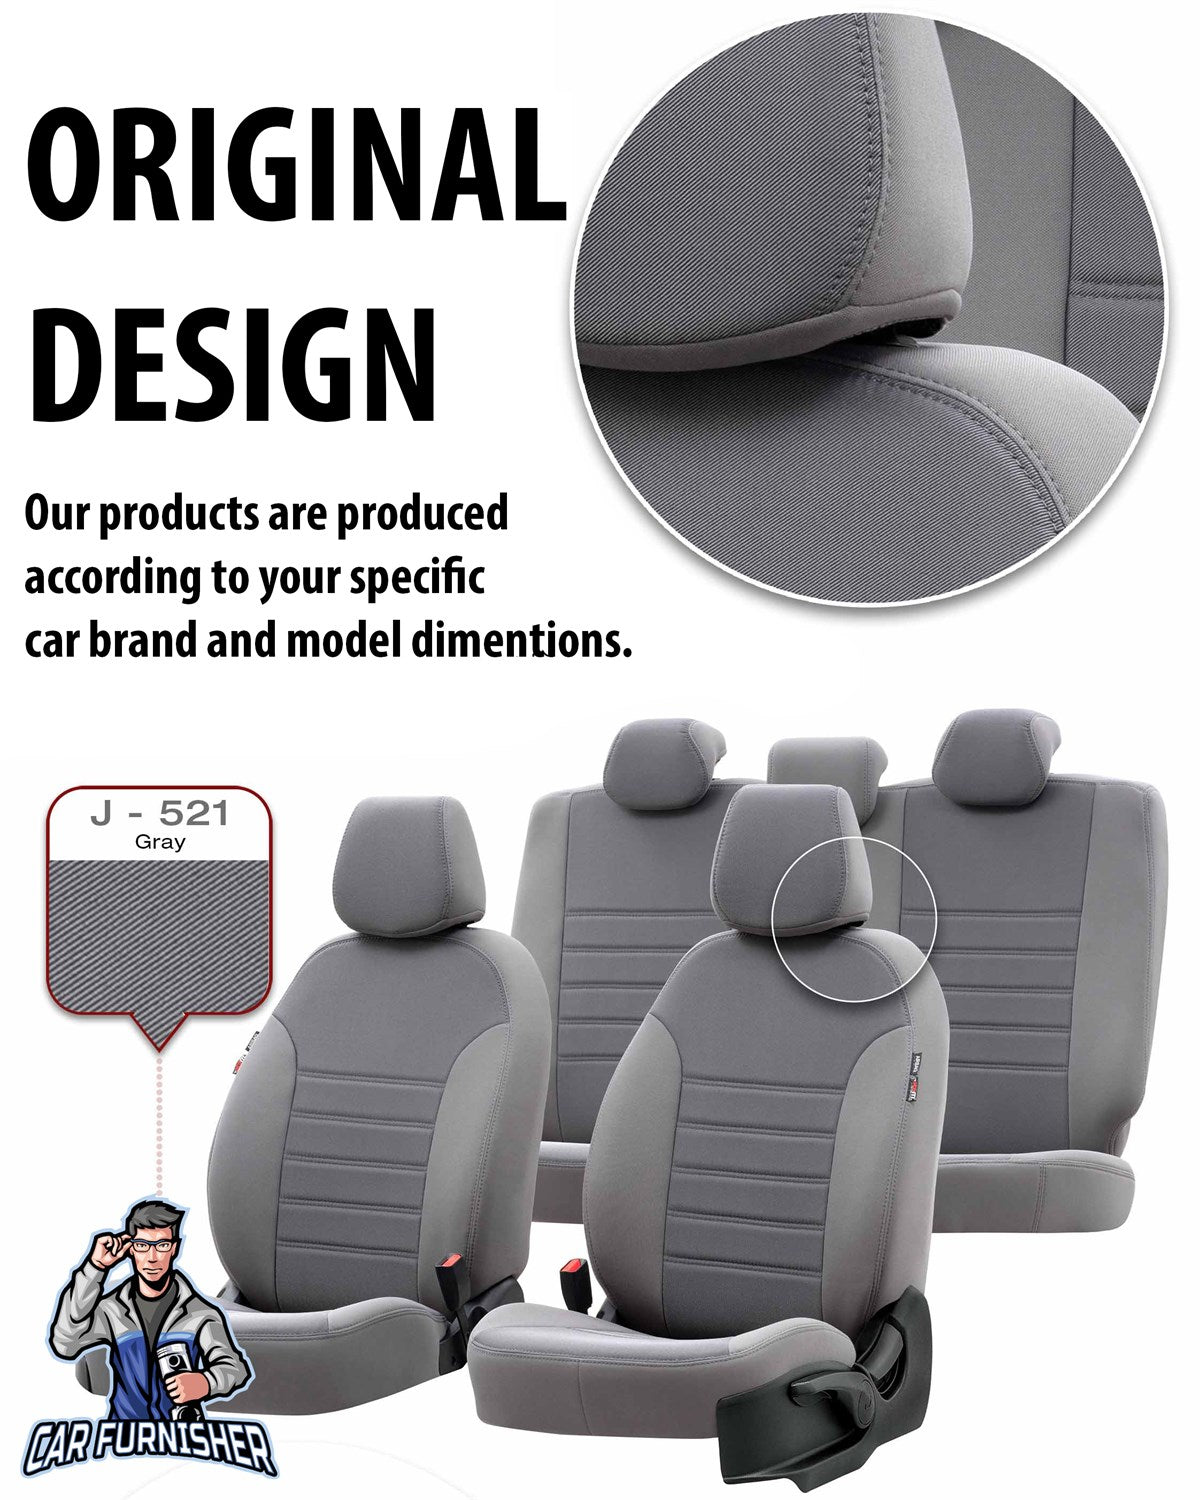 Volkswagen Sharan Seat Cover Tokyo Foal Feather Design Gray Jacquard Fabric